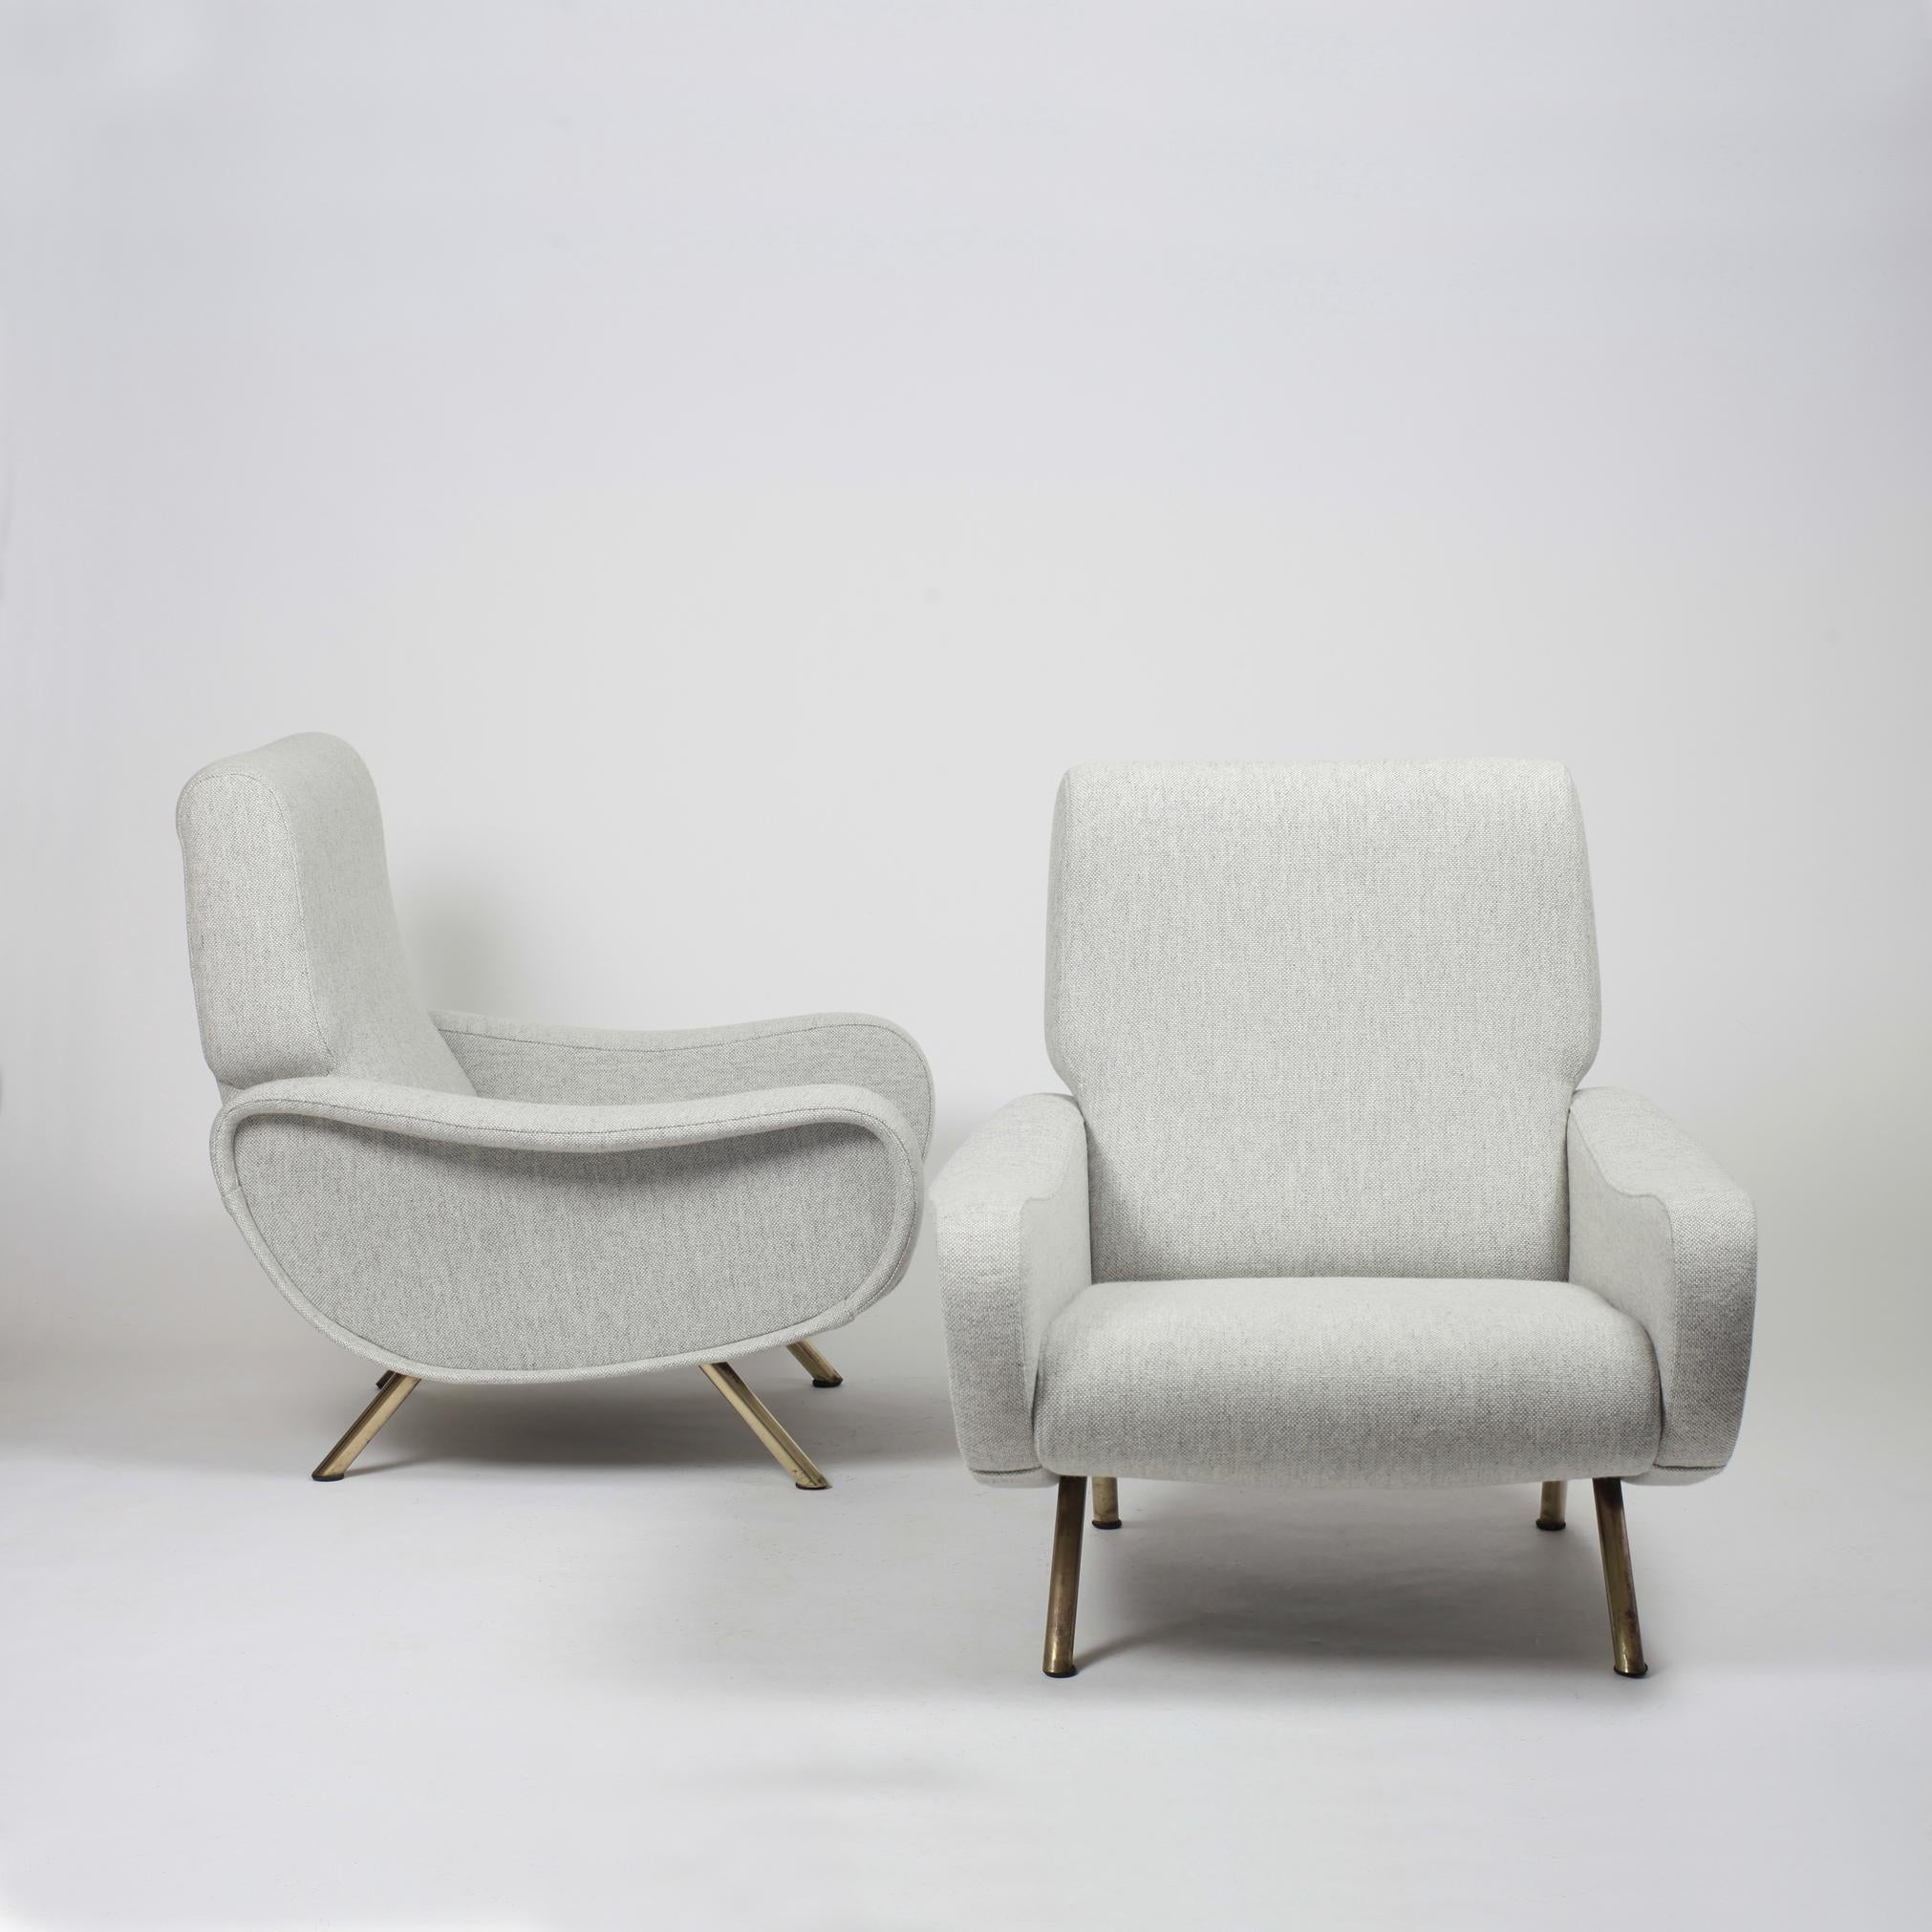 Pair of first edition Marco Zanuso lady chair for Arflex.
Fabric laced under the seat. Brass legs.
These chairs have been restored, as original, and reupholstered in a light grey Kvadrat woolen fabrics with new foam and straps.
Arflex label.